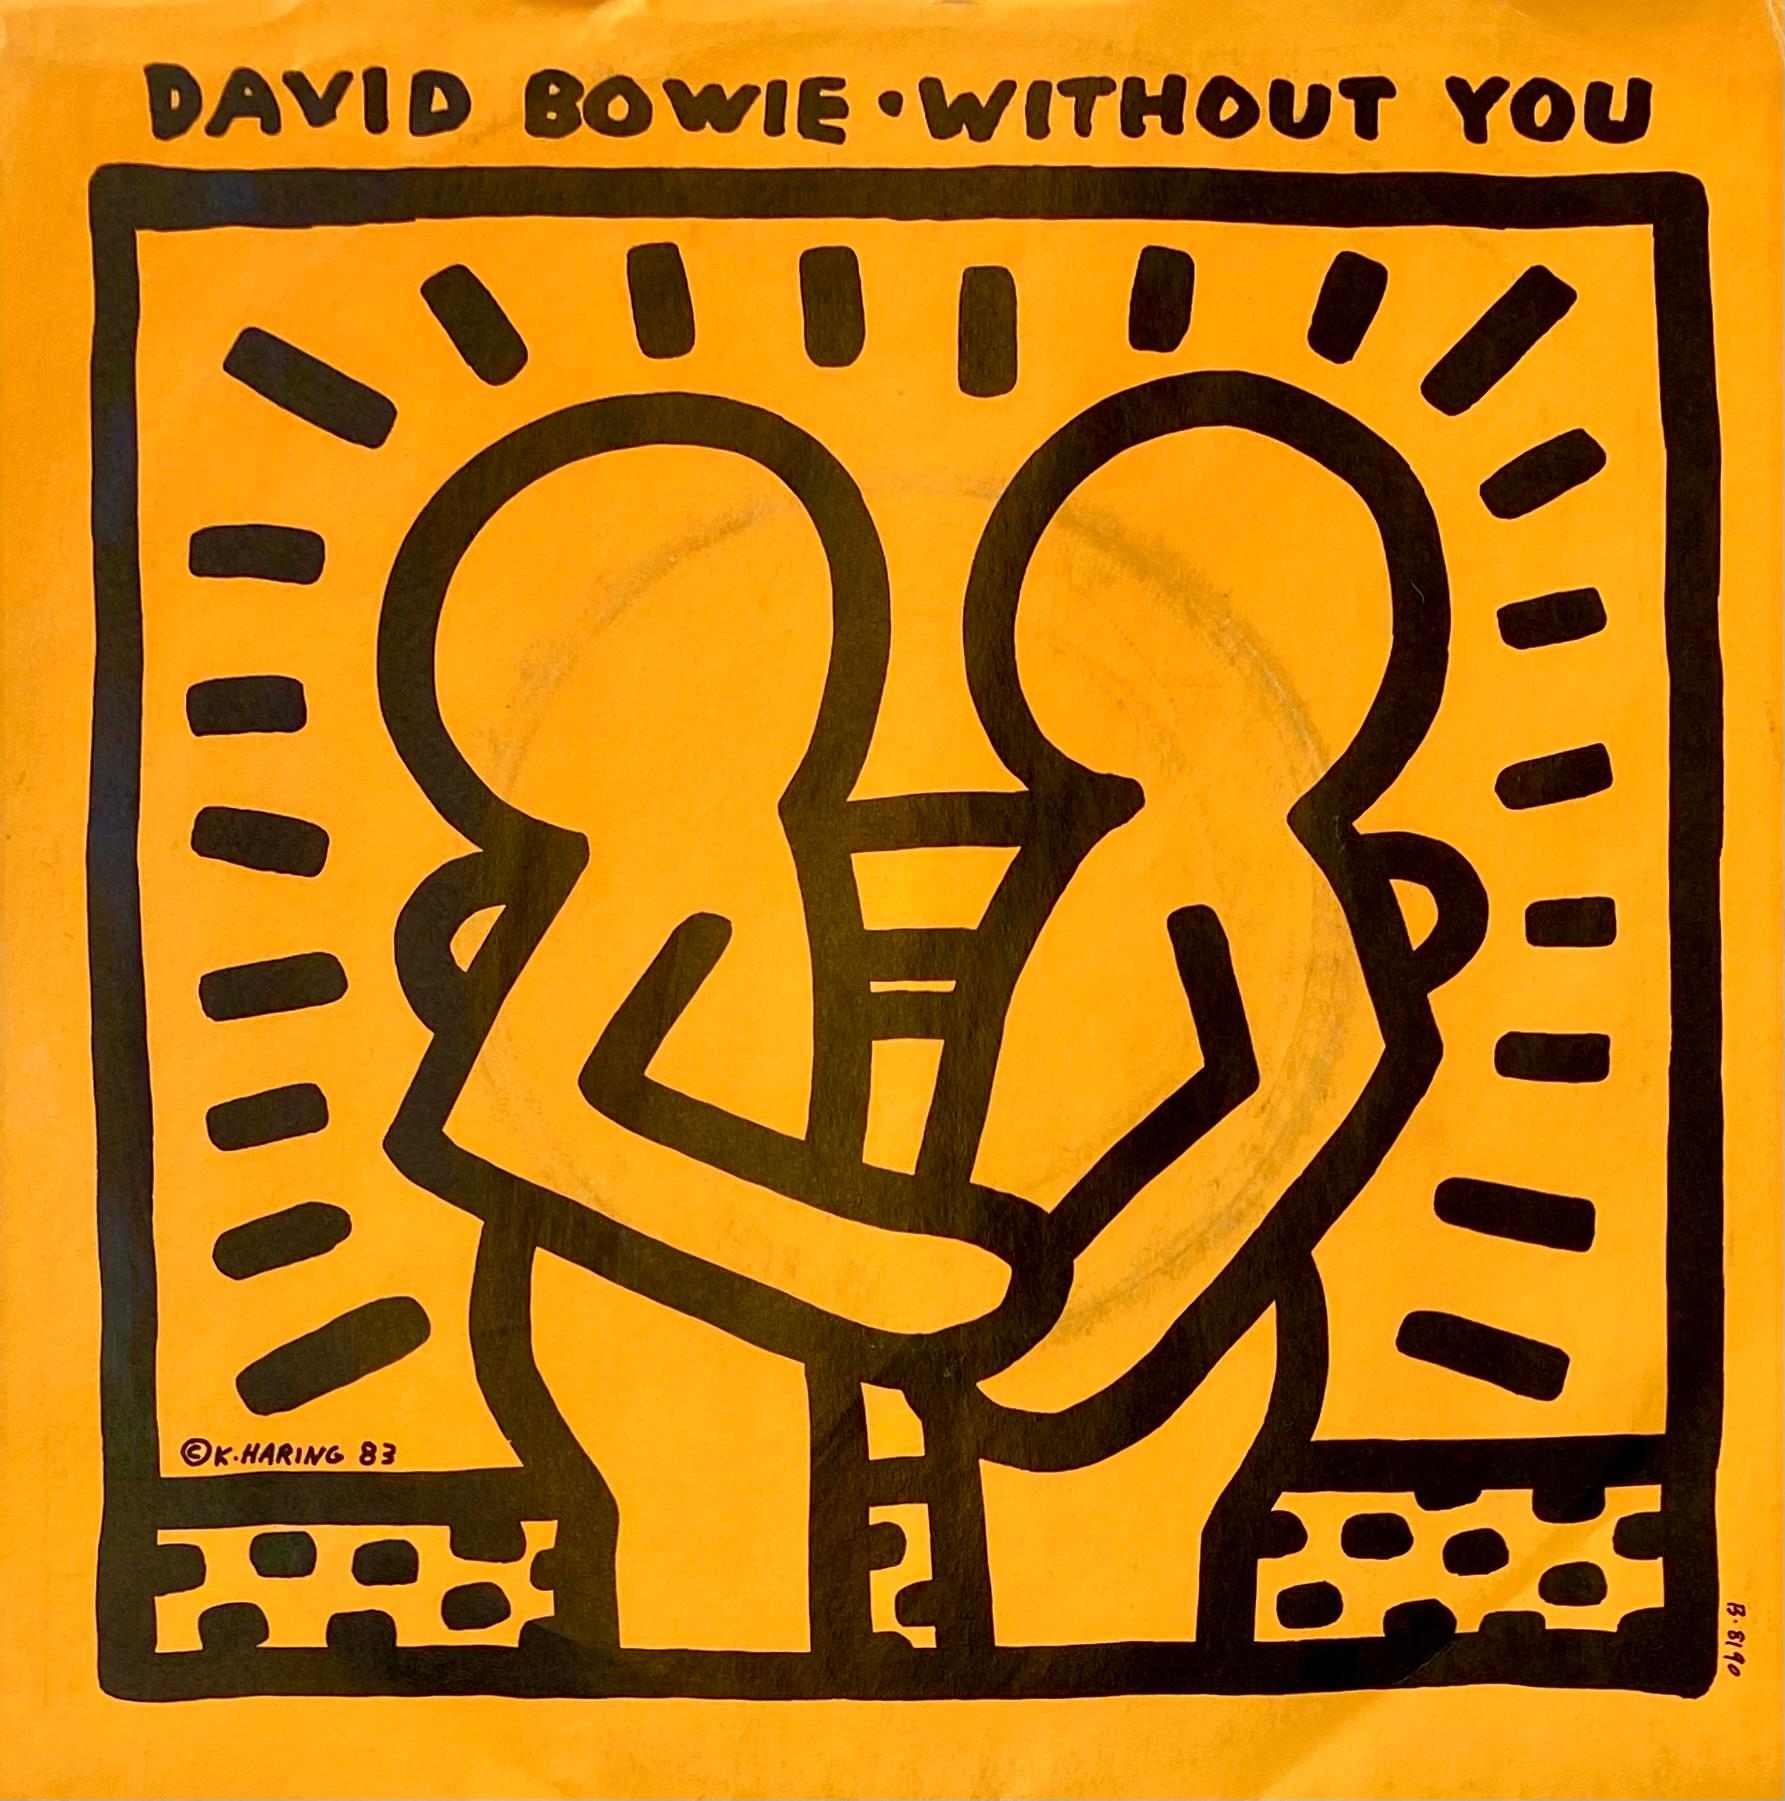 1980s Keith Haring Record Art:
David BOWIE "Without You" A Rare Highly Sought After Vinyl Art Cover featuring original cover artwork by Keith Haring.

Year: 1983.

Medium: Off-Set Lithograph.

Dimensions: 7 x 7inches; 
Minor to medium level ring